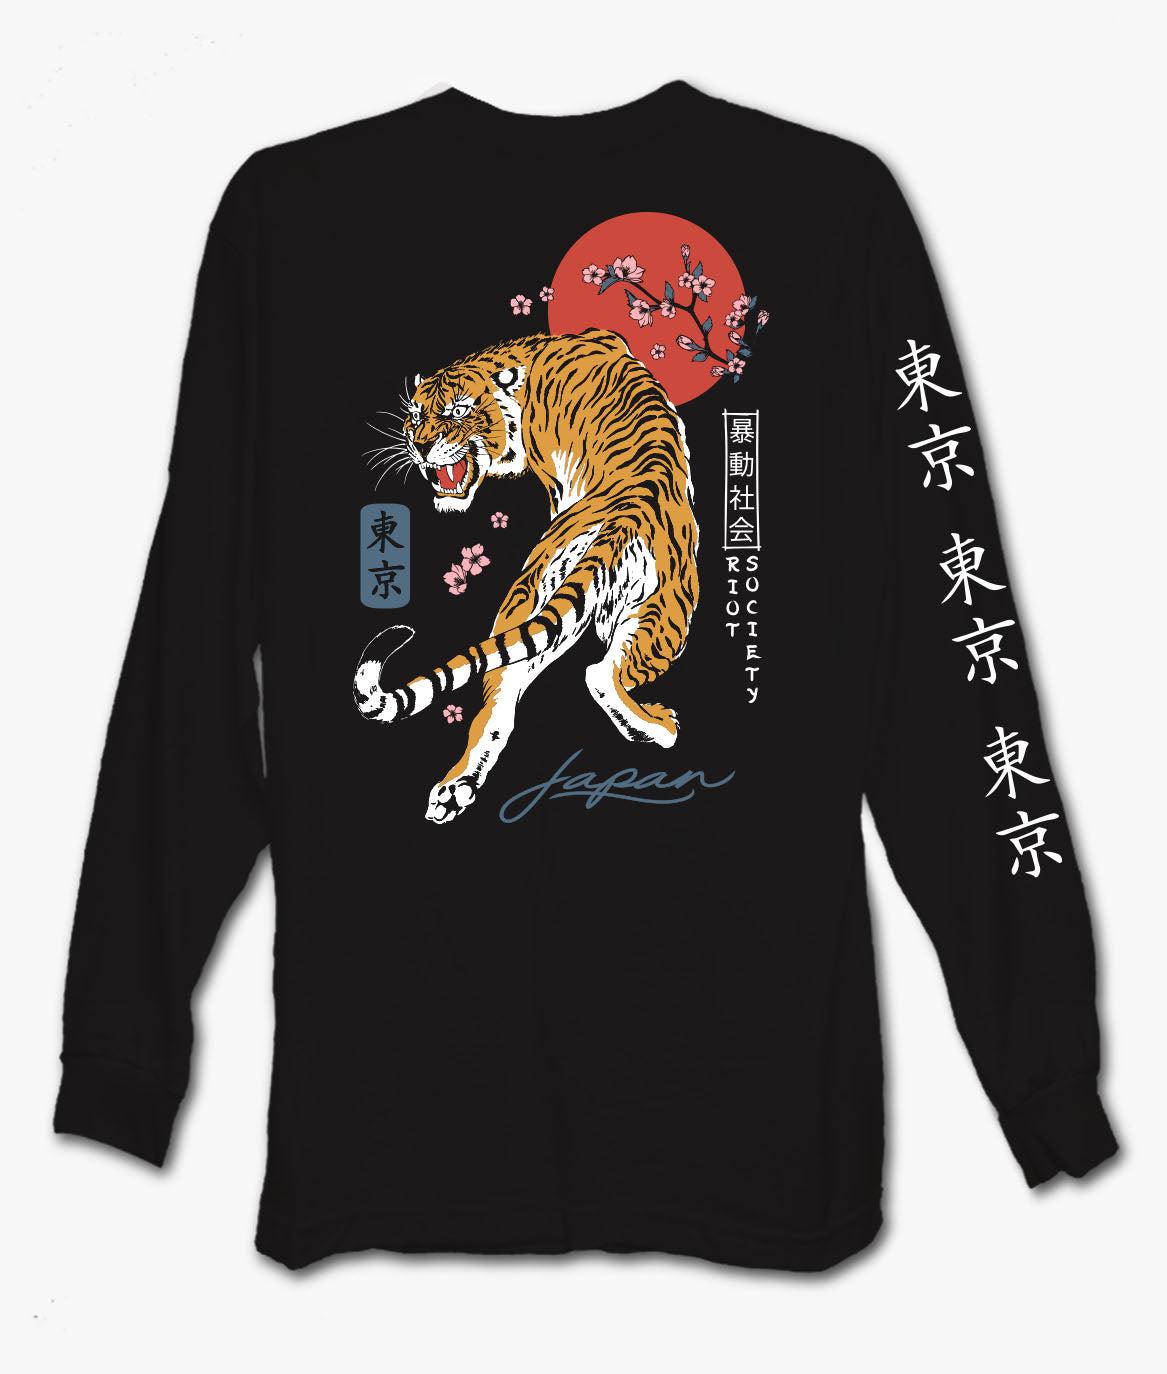 For All The Bengals Tiger Shirt, hoodie, longsleeve, sweatshirt, v